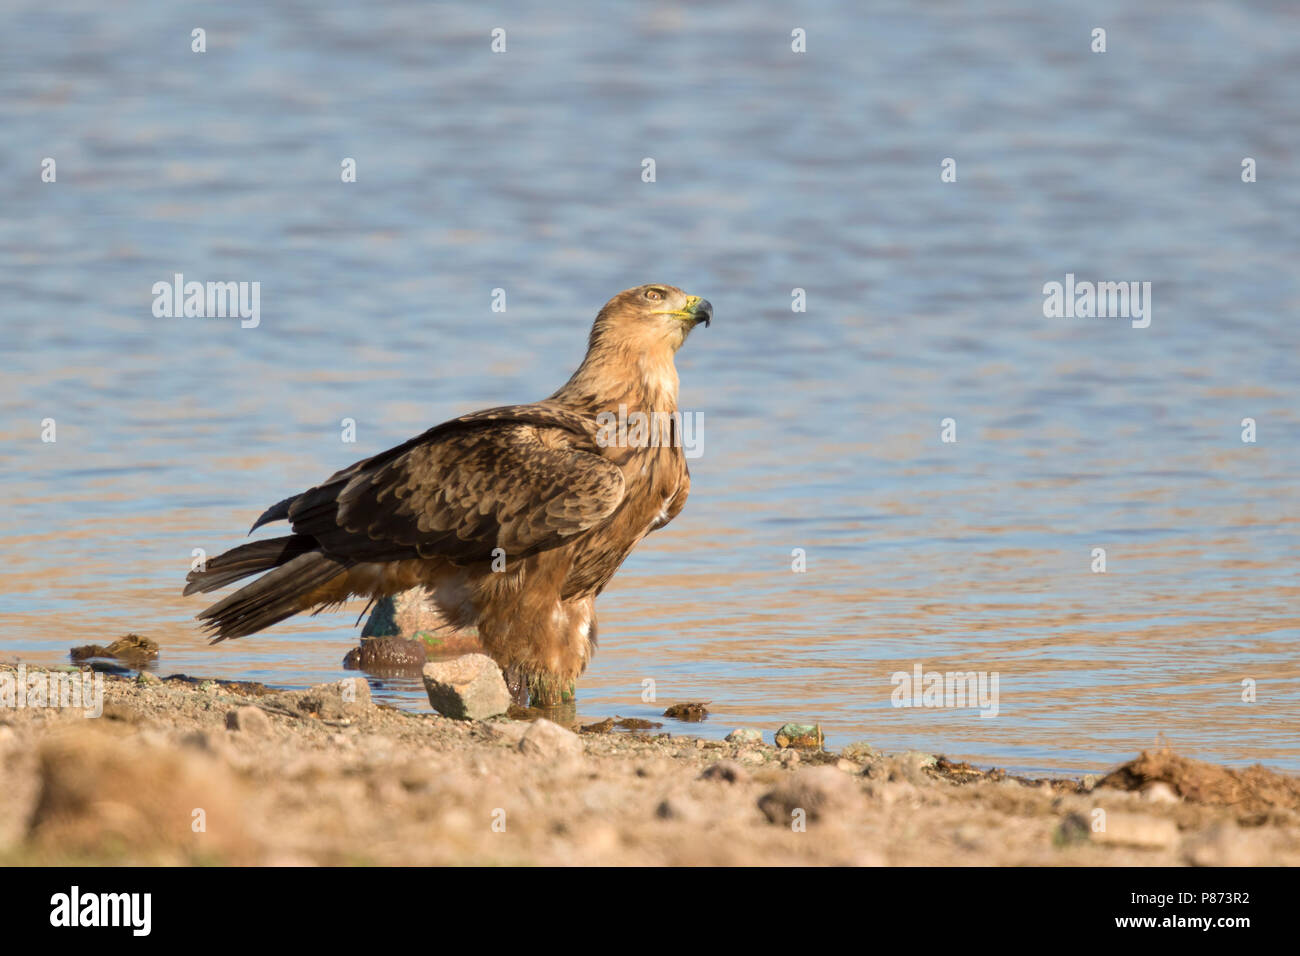 Savanne arend water drinkend; Tawny Eagle drinking water; Stock Photo